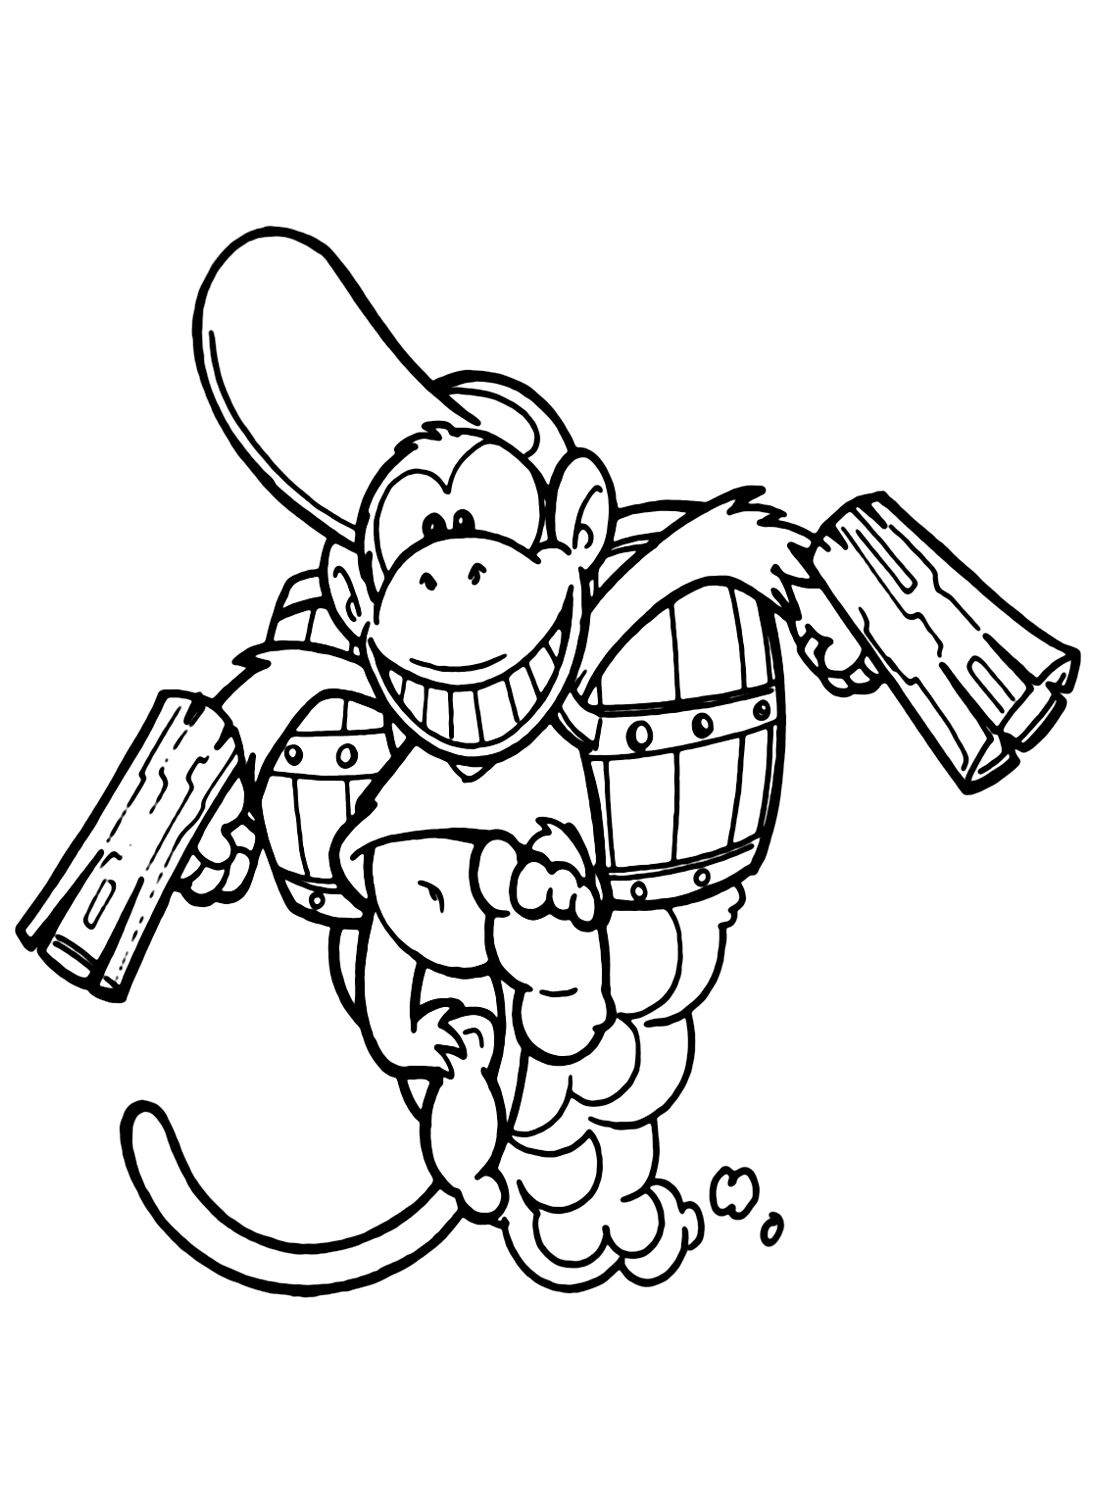 Funny Diddy Kong Coloring Page